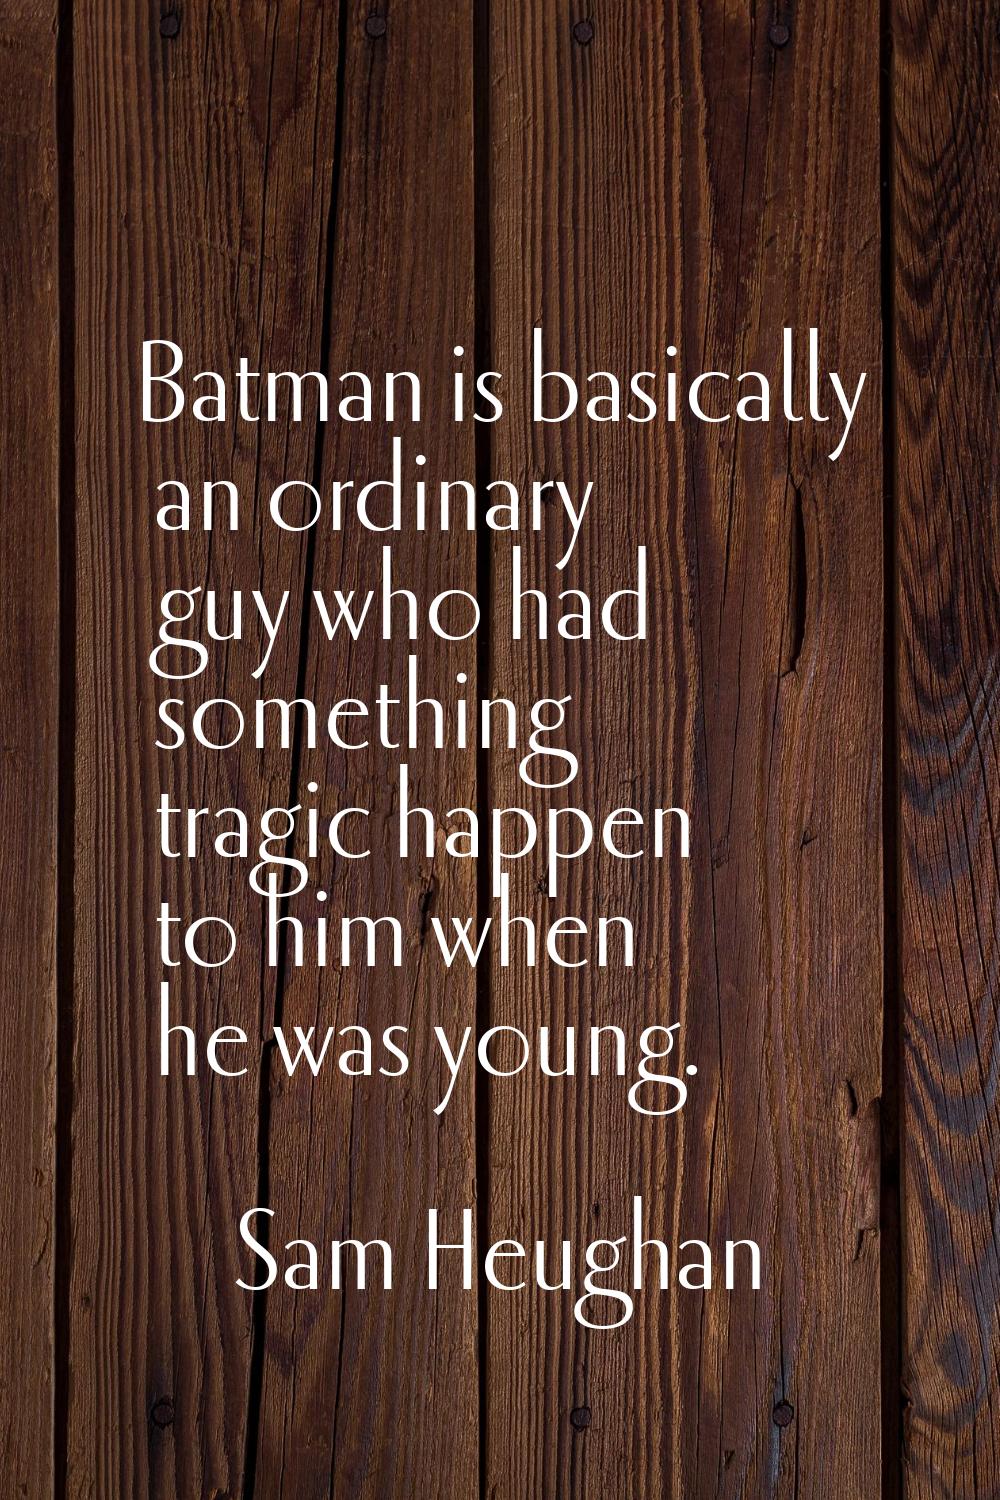 Batman is basically an ordinary guy who had something tragic happen to him when he was young.